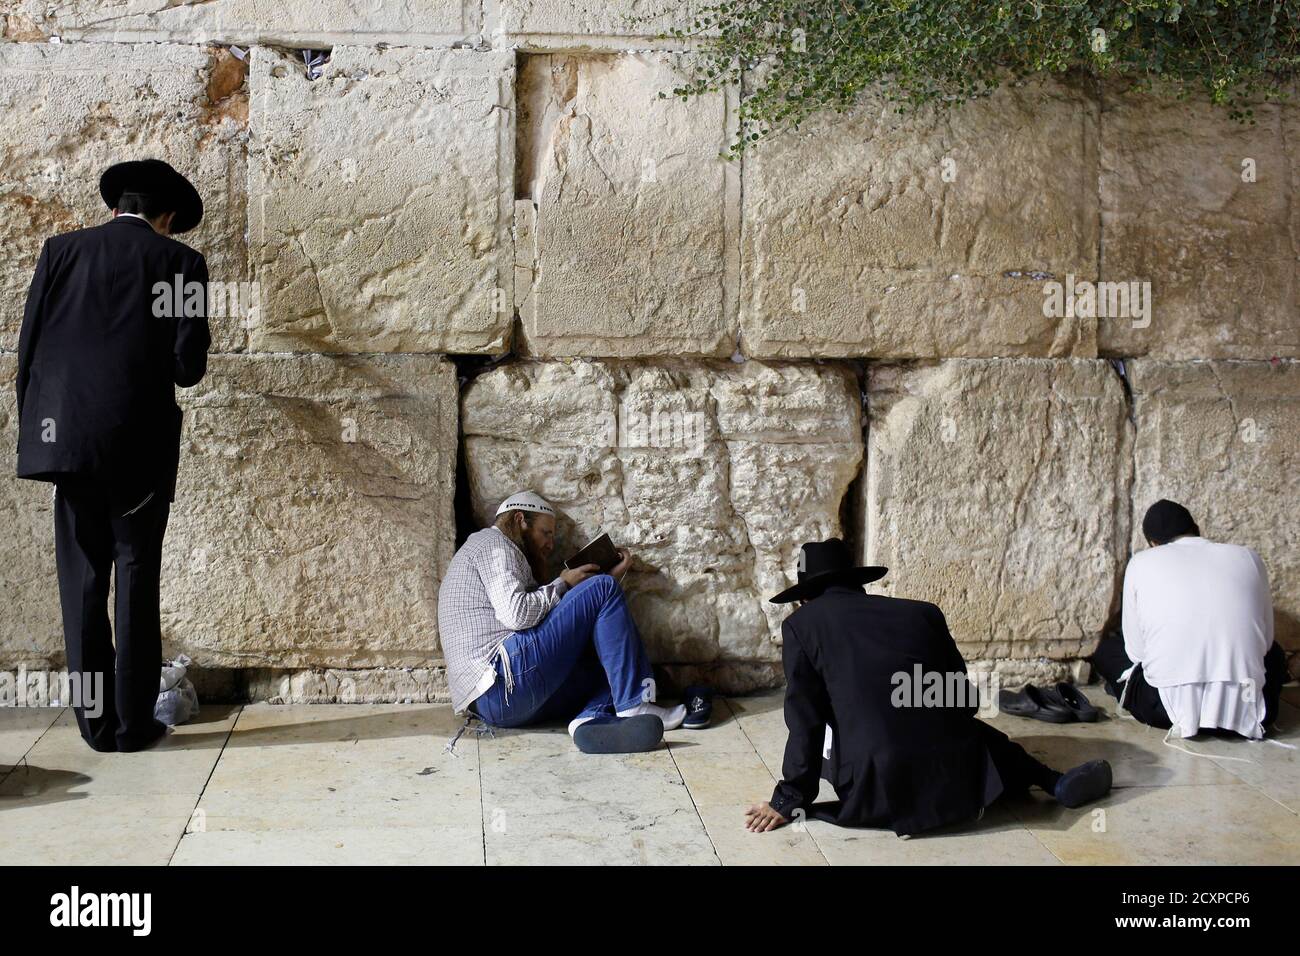 Jewish worshippers take part in prayers marking Tisha B'Av at the Western Wall, Judaism's holiest prayer site, in Jerusalem's Old City August 5, 2014. Tisha B'Av, a day of fasting and lament, commemorates the date in the Jewish calendar on which it is believed that First and Second Temples were destroyed in Jerusalem. REUTERS/Siegfried Modola (JERUSALEM - Tags: RELIGION) Stock Photo